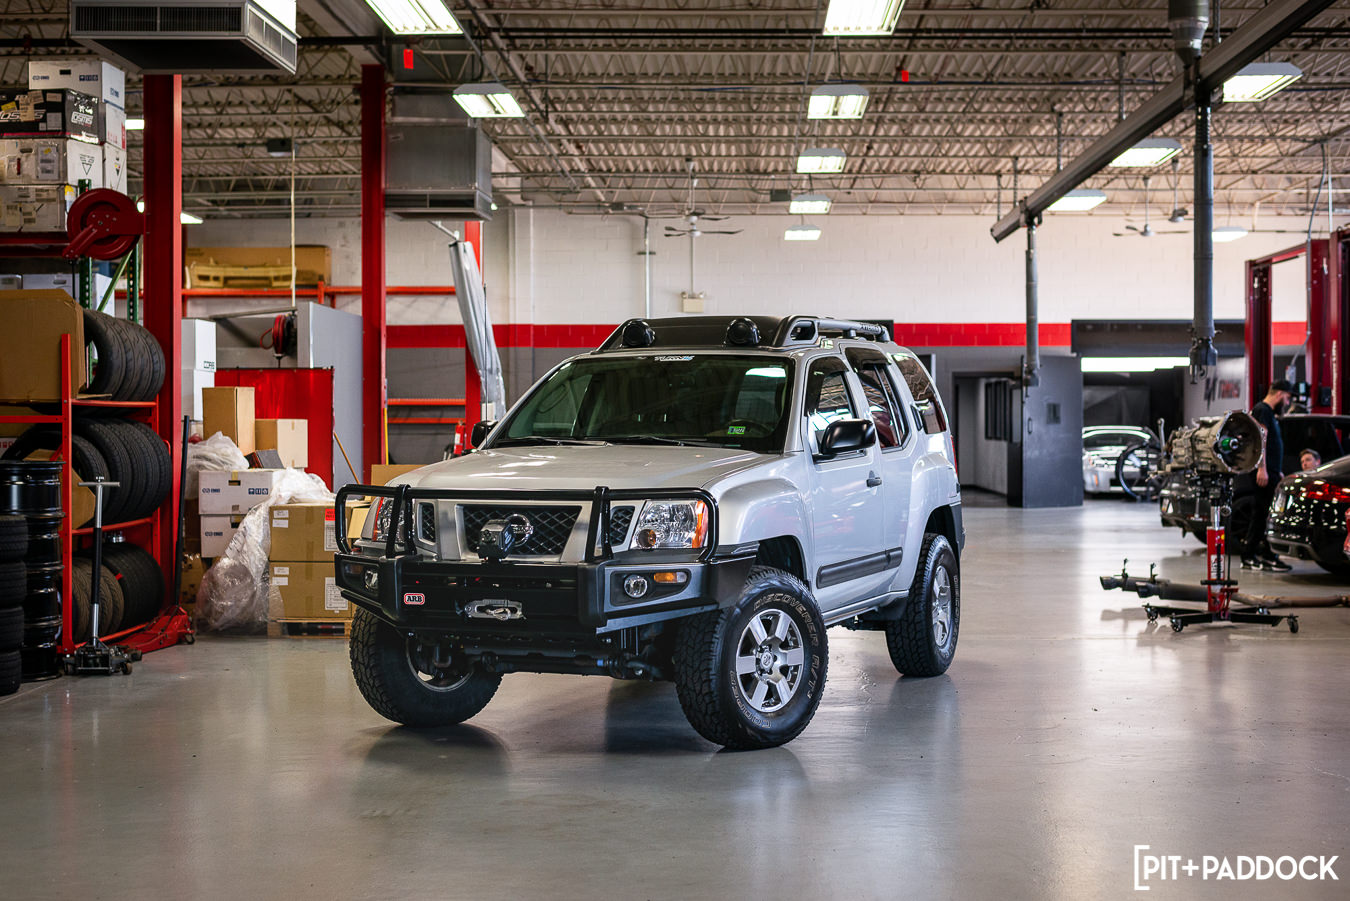 Lifting and Off-Road Prepping Nissan's Capable Gen2 Xterra